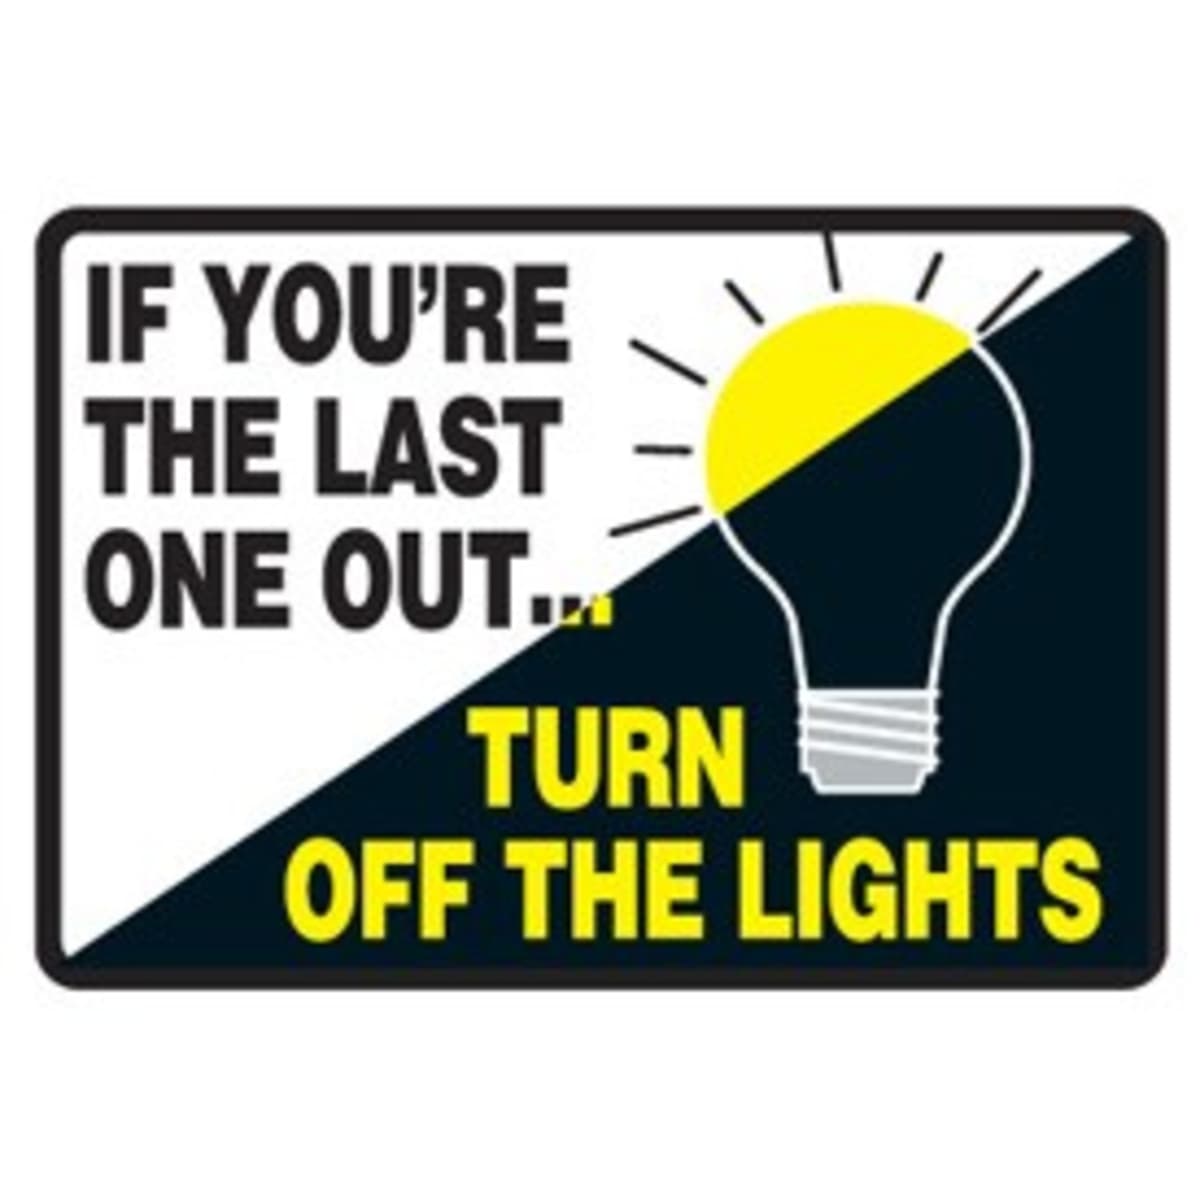 Turn off means. Turn off the Lights. Please turn off the Light. Turn of the Light. Turn out the Lights.